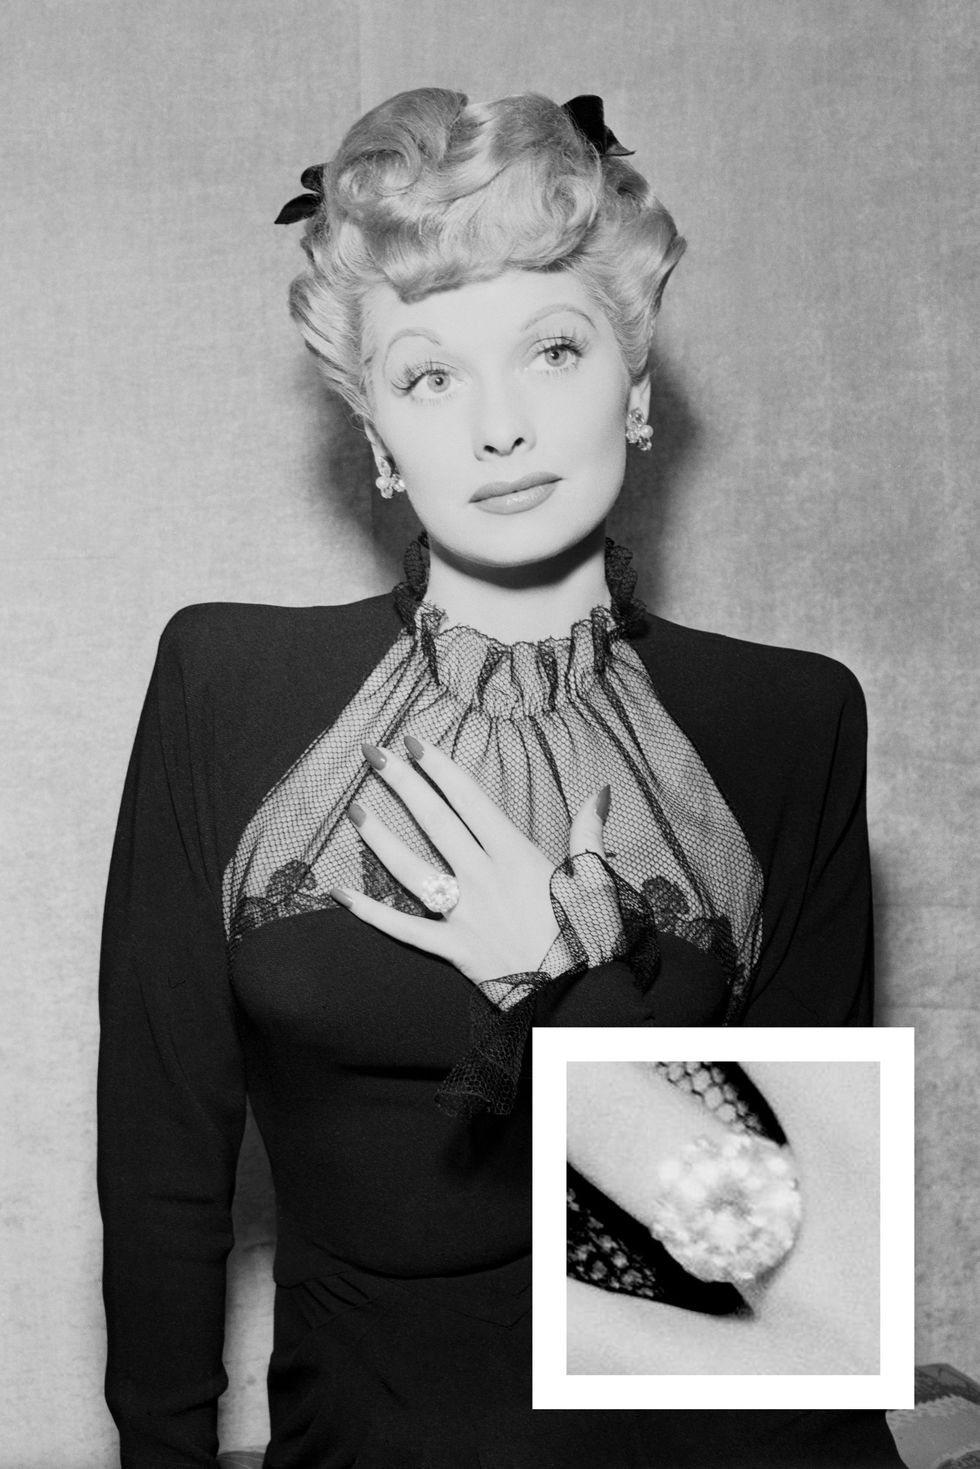 <p>Ball received a brass ring from Desi Arnaz when they eloped, but he later upgraded the actress's engagement ring to a large cushion-cut diamond and platinum ring.</p>